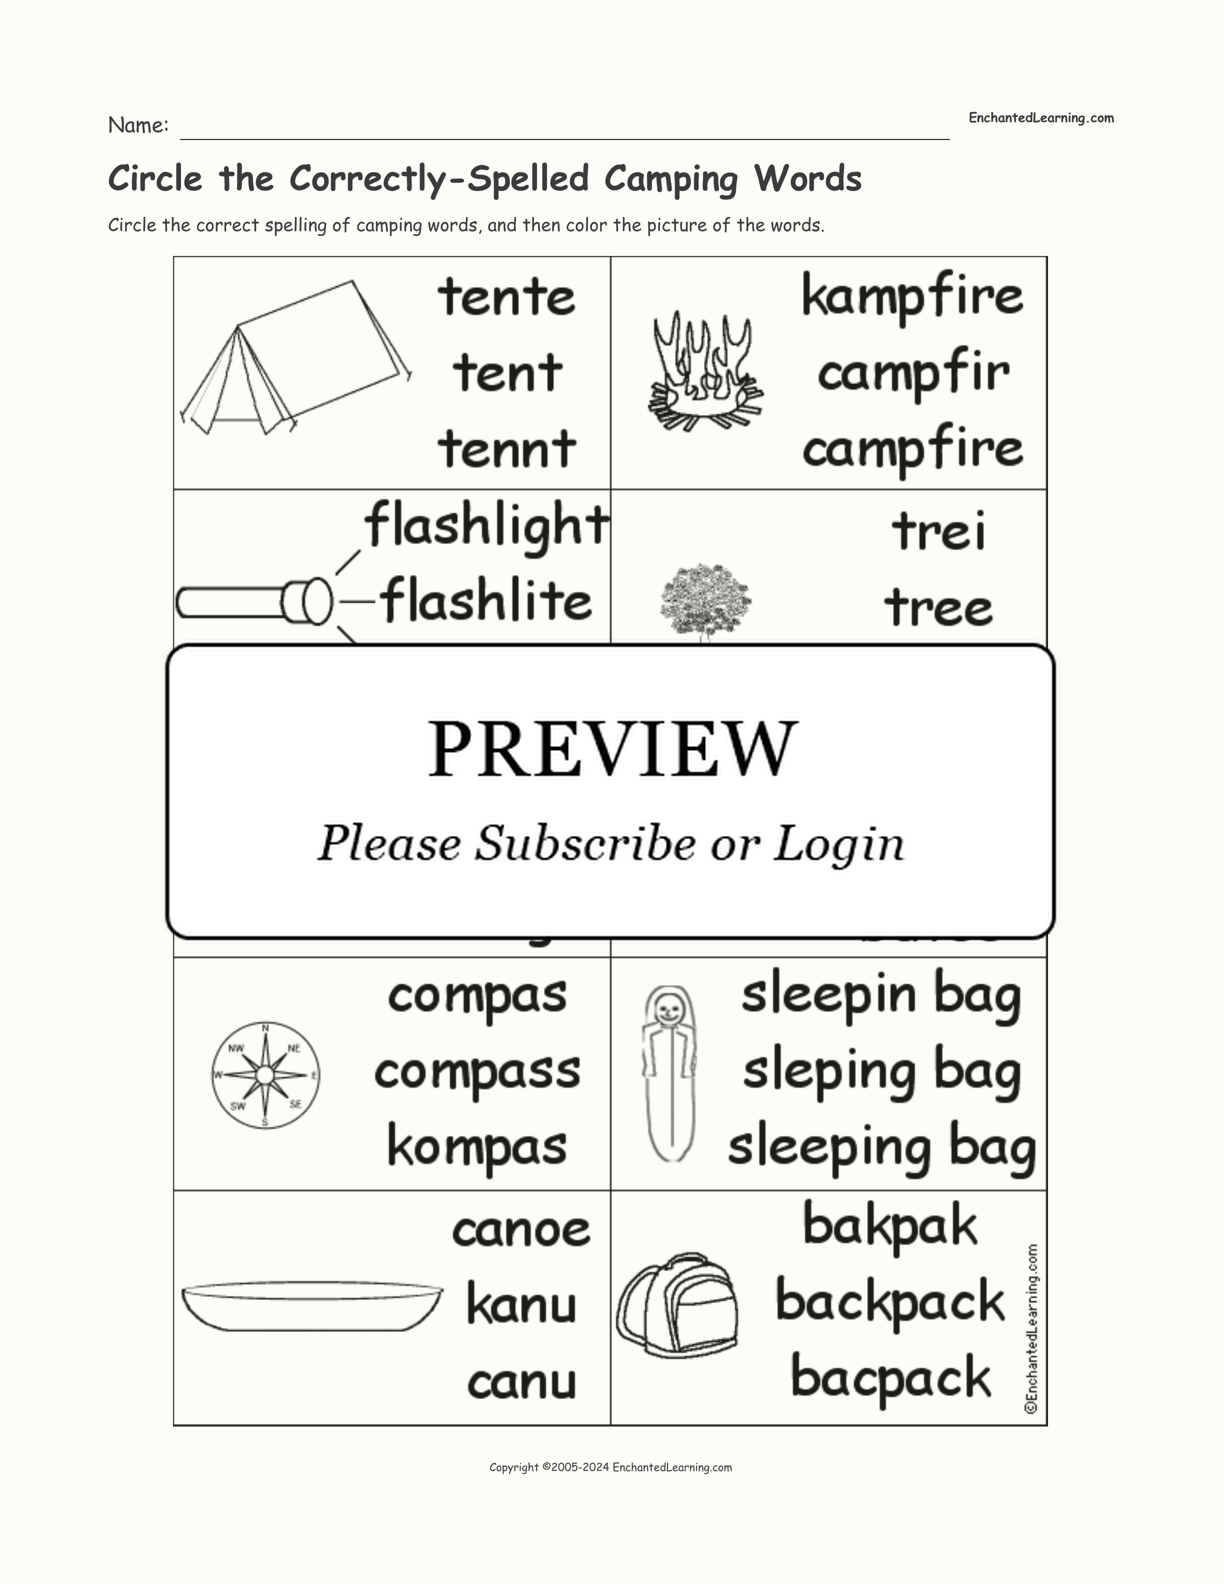 Circle the Correctly-Spelled Camping Words interactive worksheet page 1